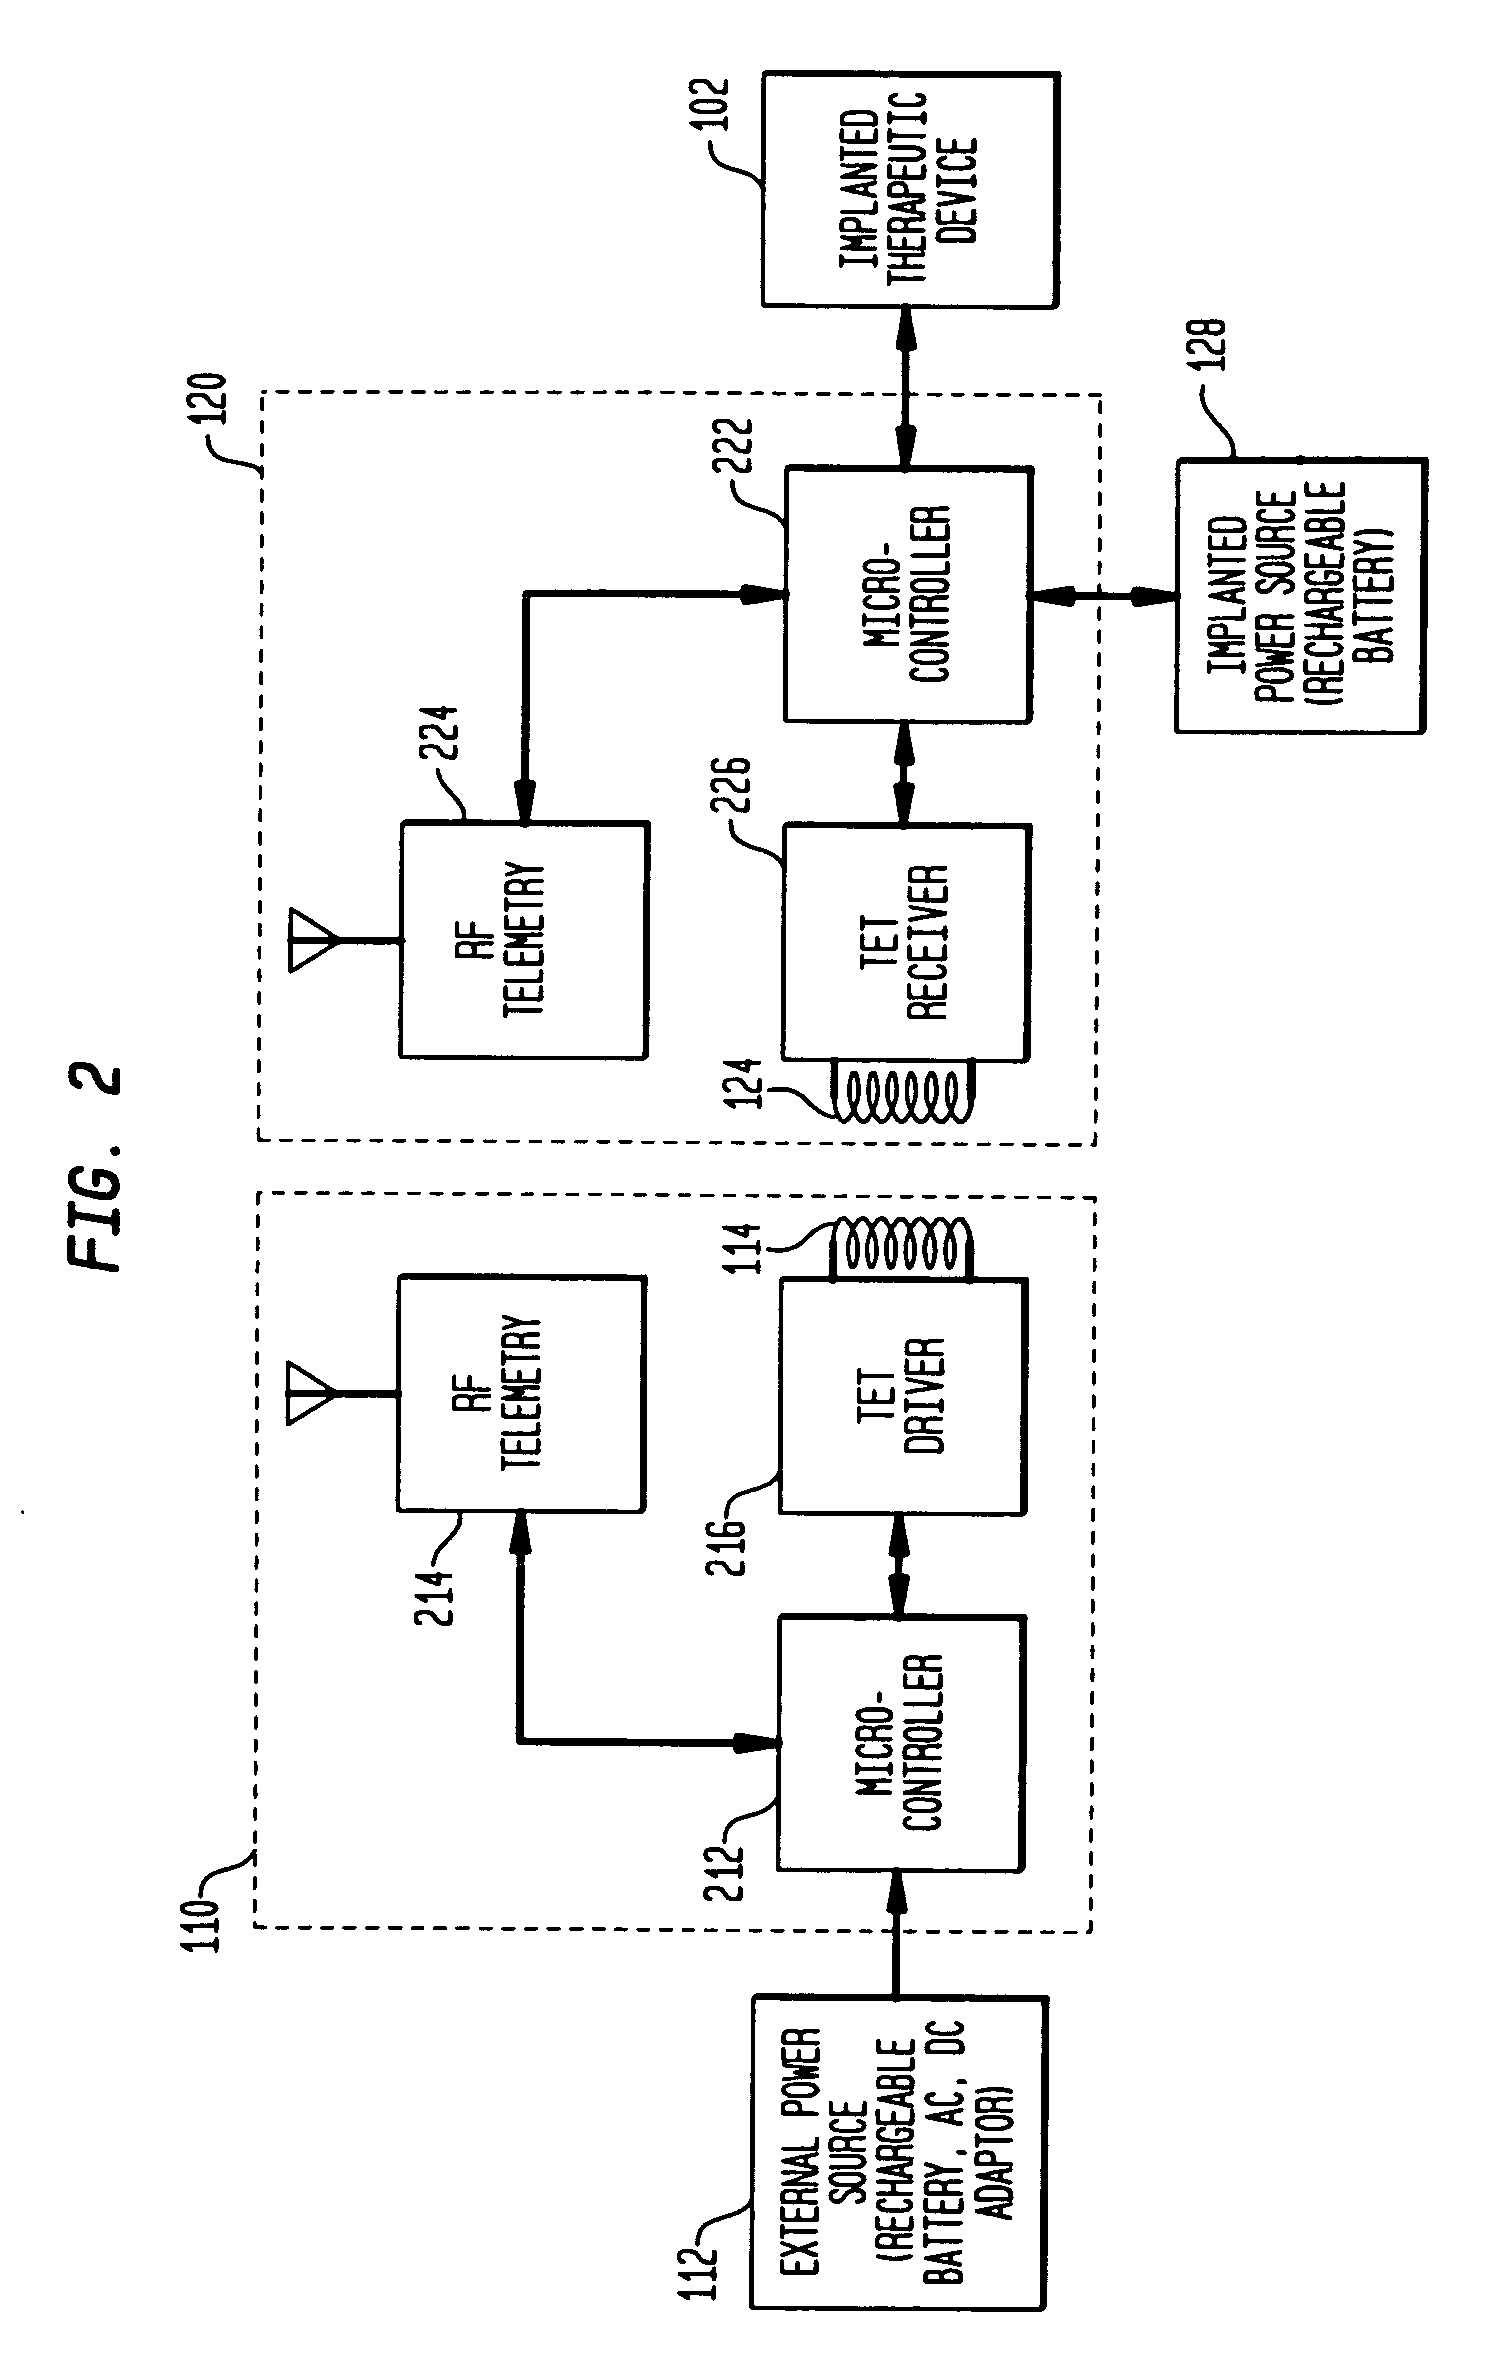 Tet system for implanted medical device